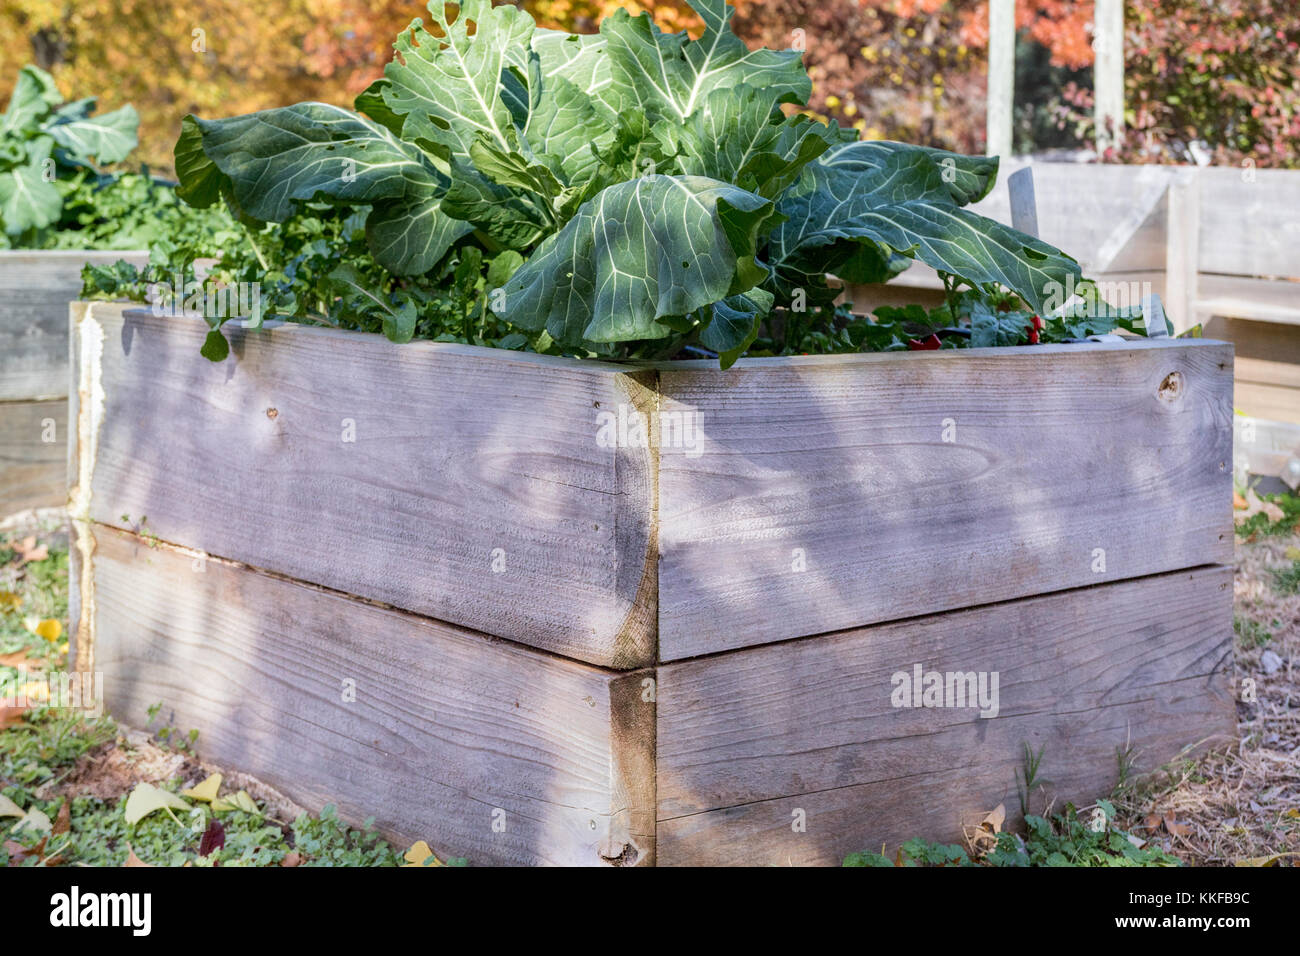 Sustainable Green Home Vegetable Planter Boxes Stock Photo